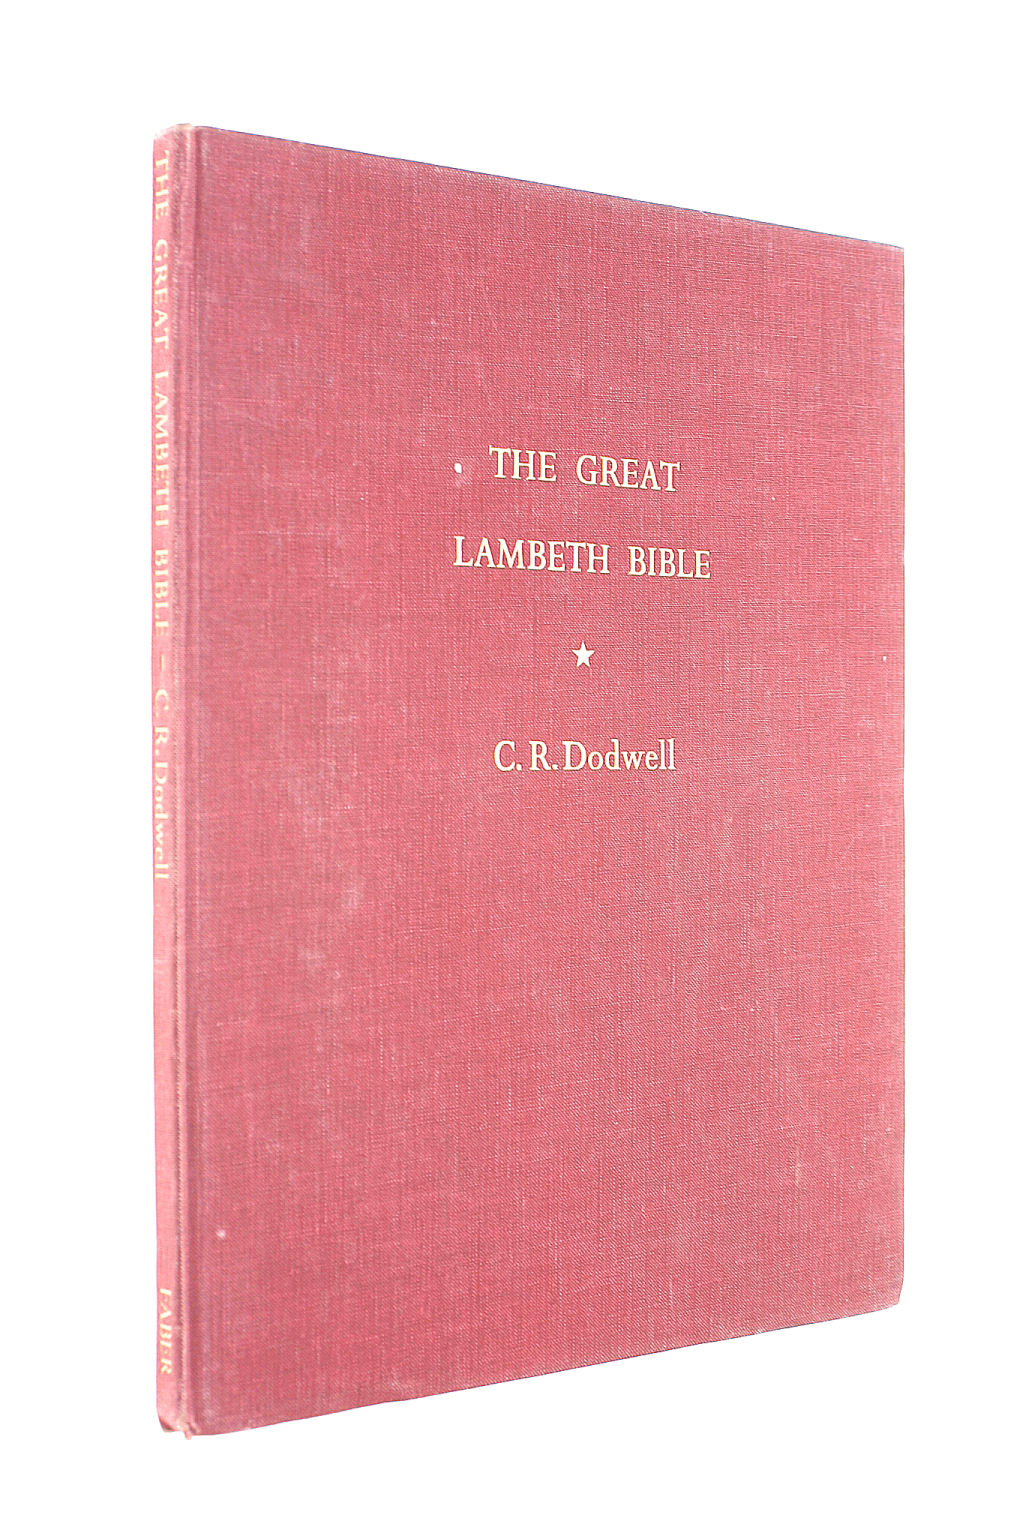 CHARLES REGINALD DODWELL - The Great Lambeth Bible (Faber Library of Illuminated Manuscripts)